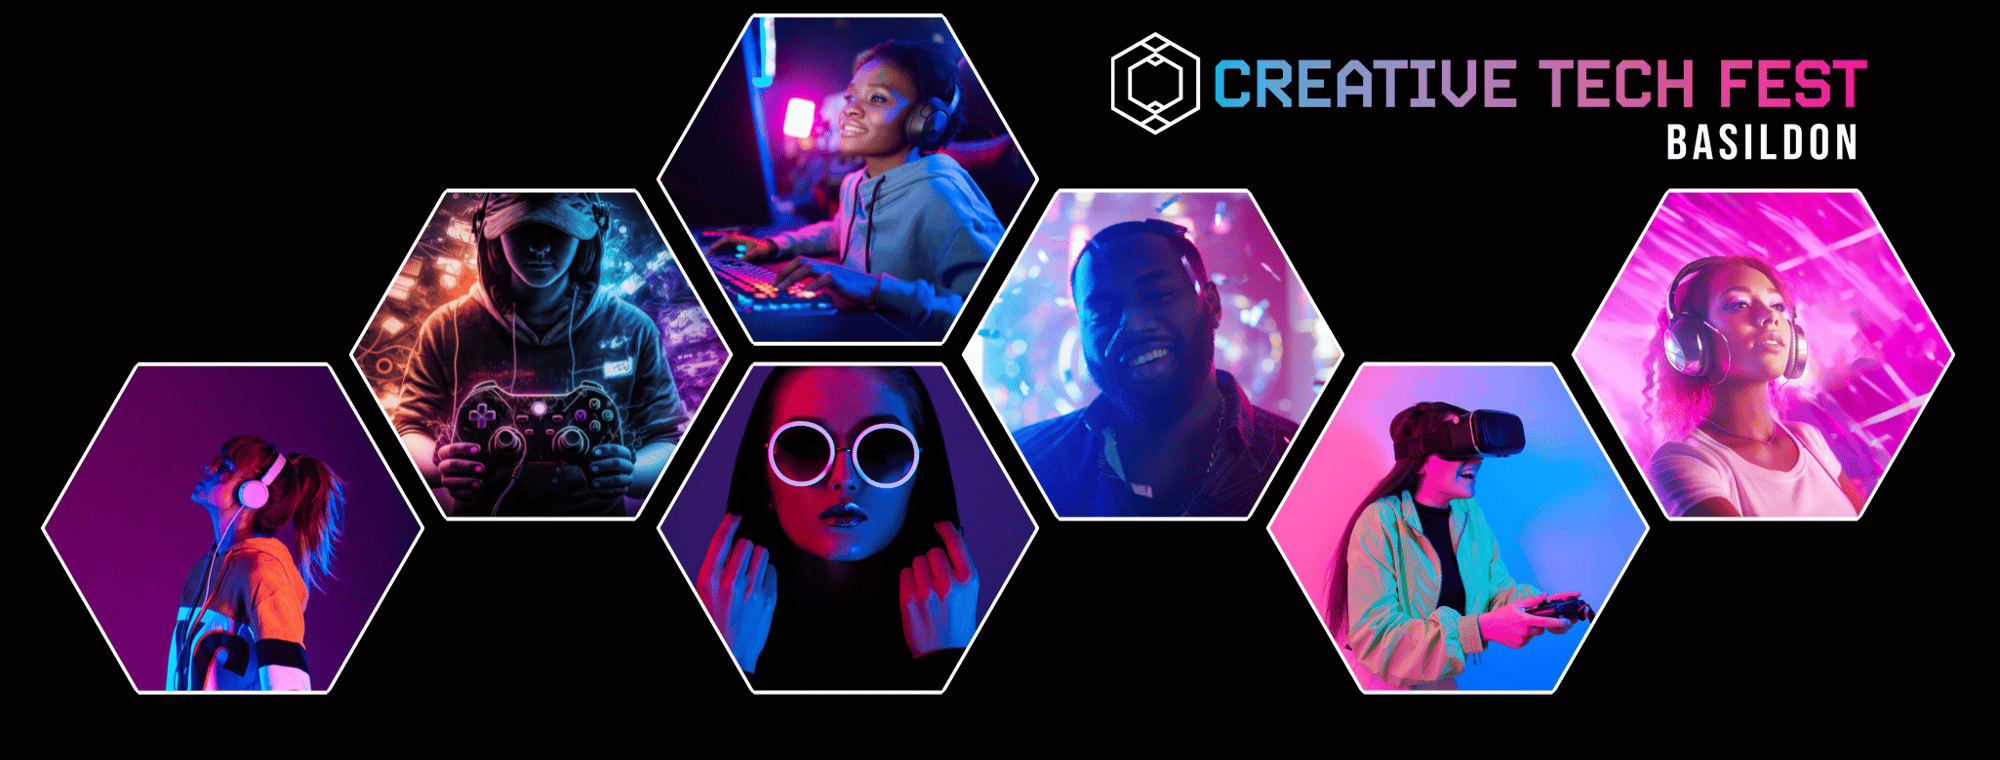 Hexagons with images of young people doing tech-related activities